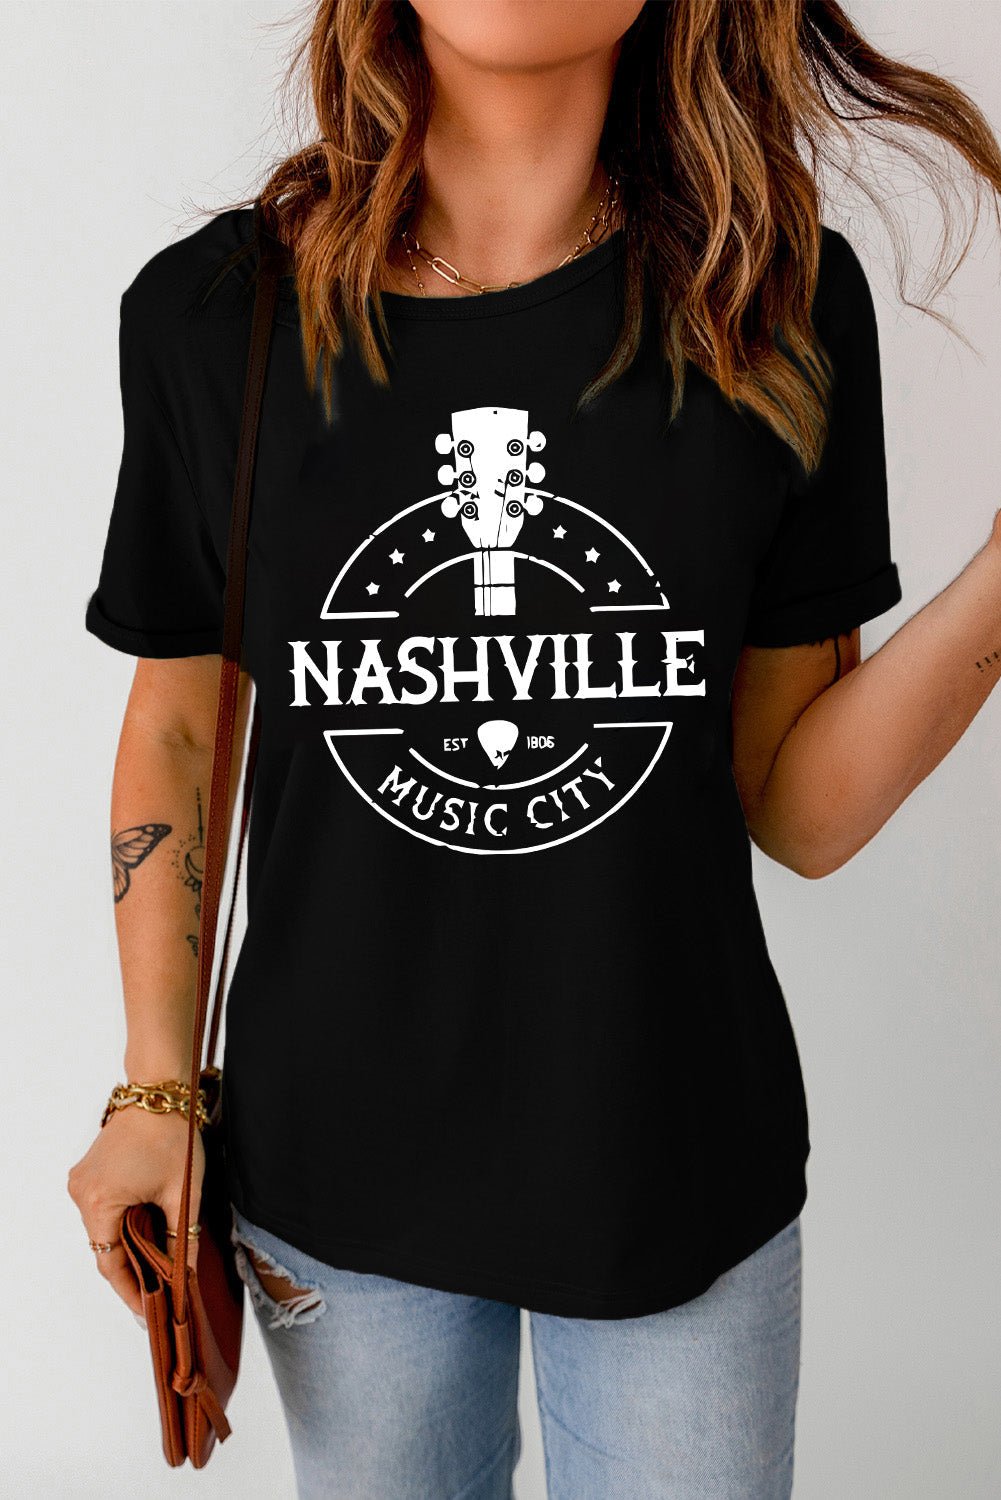 Captivate Your Heart with the Western Nashville Music City Cuffed Graphic Tee Shirt - Embrace the Beauty of Nashville's Western Culture and Experience Sublime Comfort All Day Long. - Guy Christopher